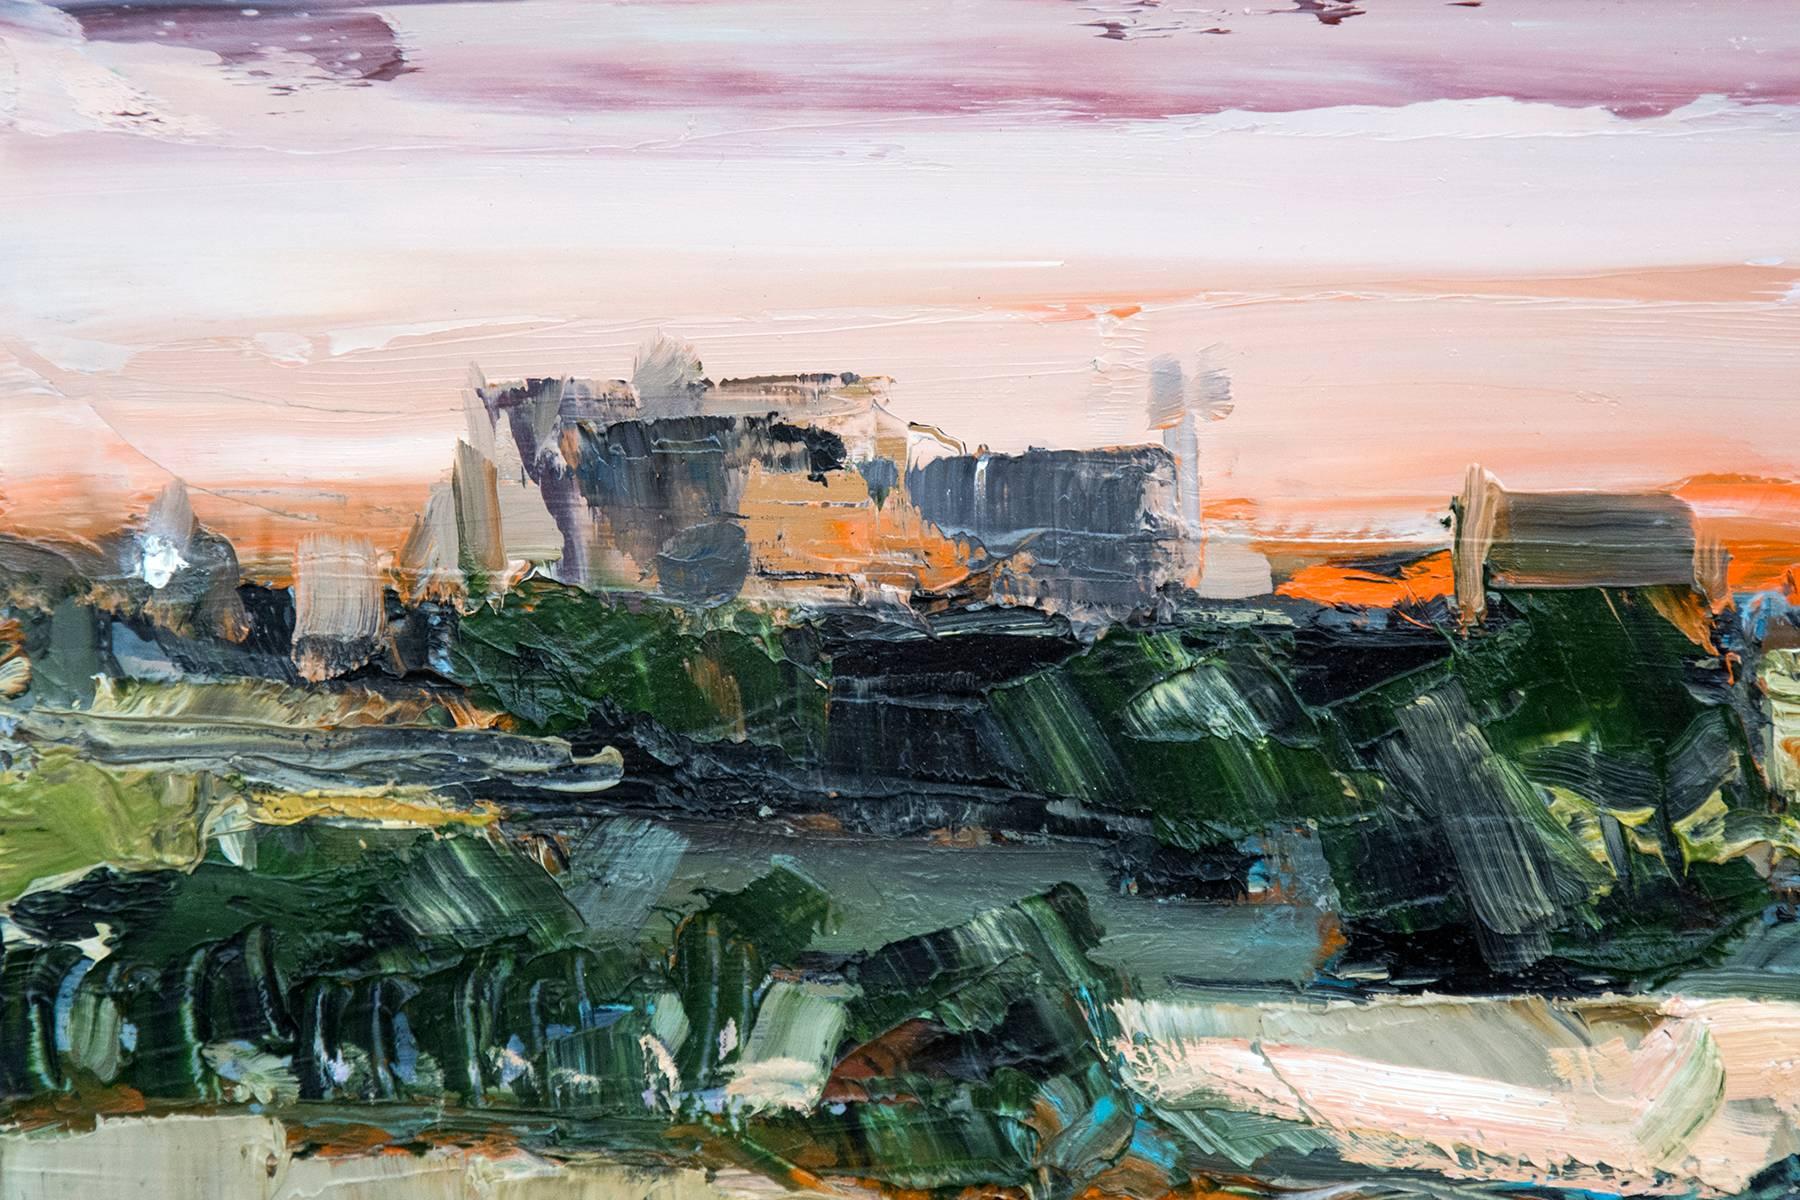 Early Shift - gestural, impasto landscape with fiery orange skyline - Contemporary Painting by Simon Andrew